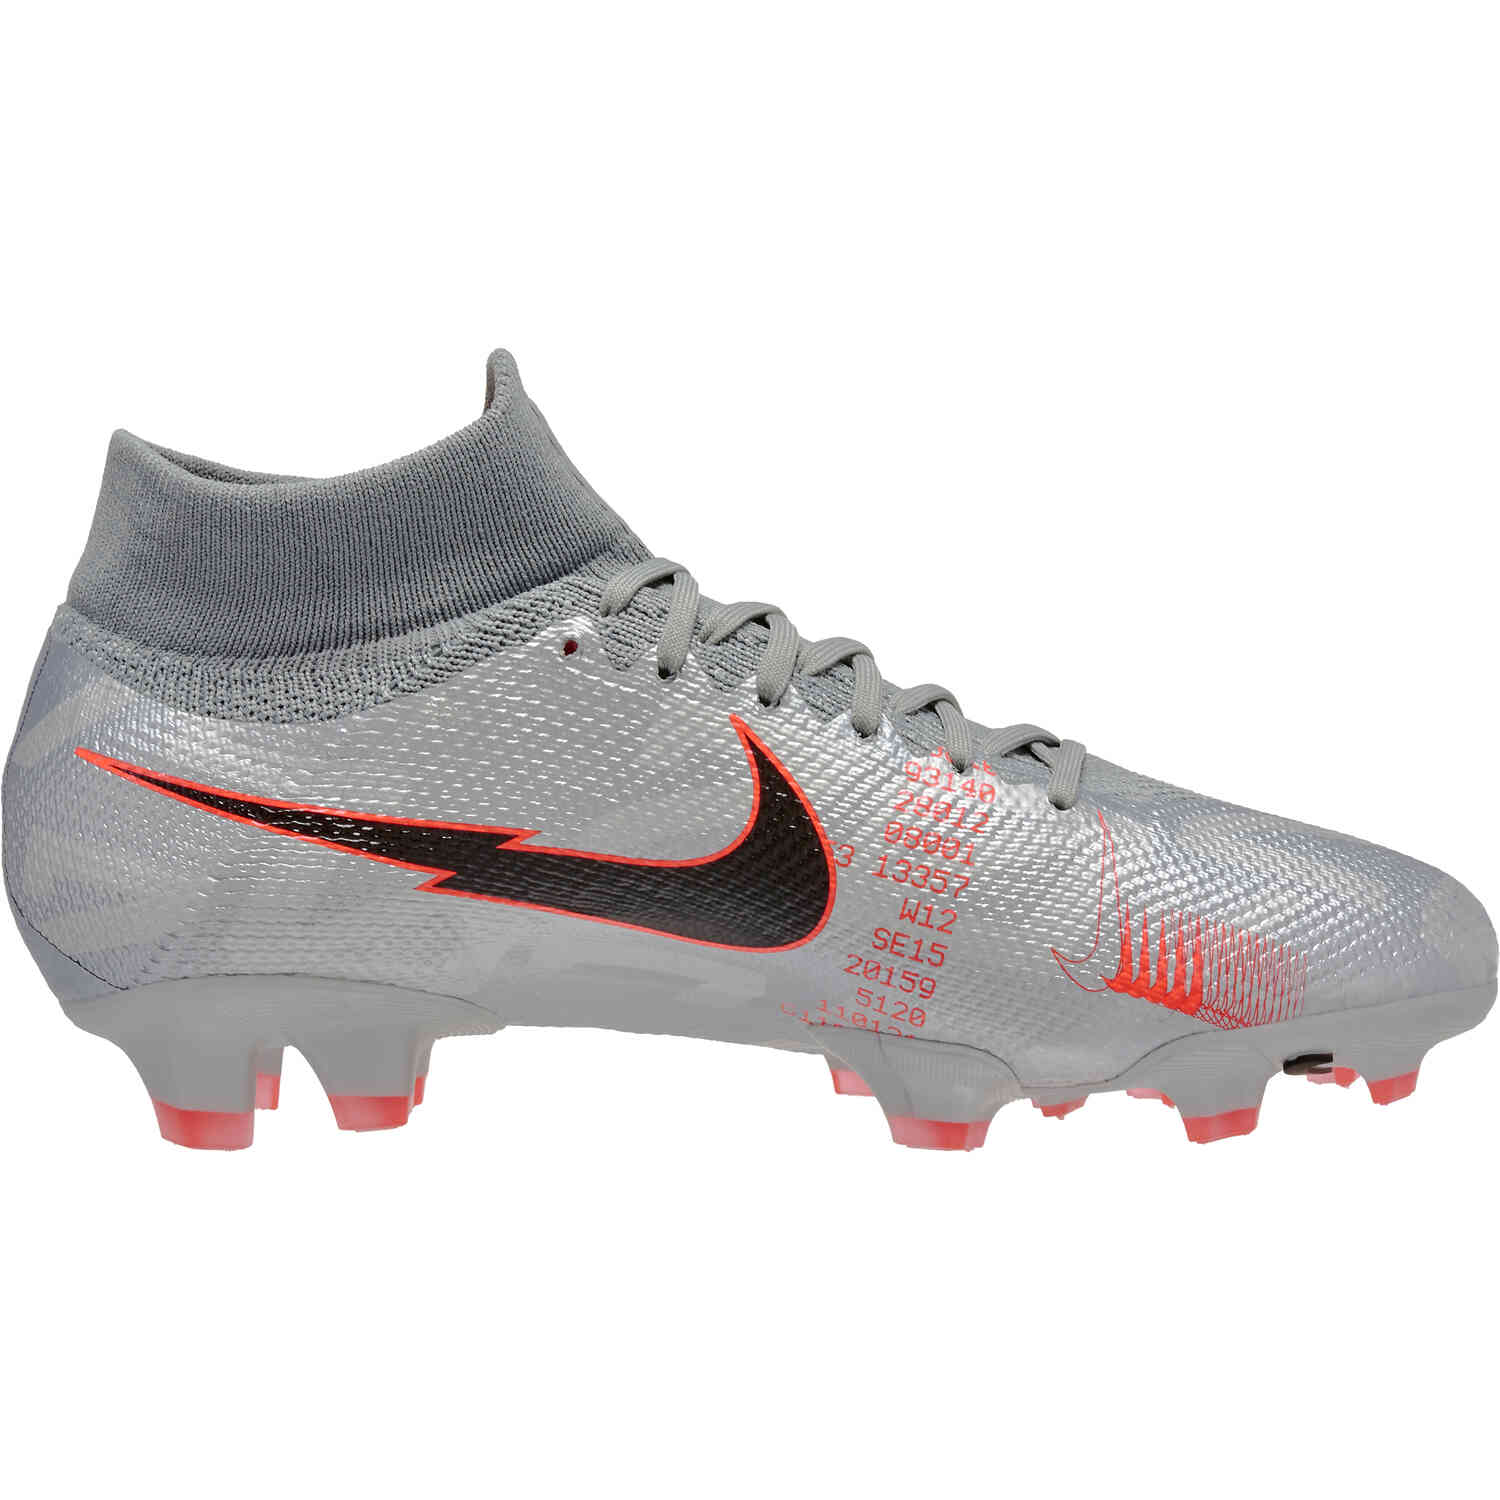 Nike Mercurial Superfly 360 Elite CR7 FG Chapter 7 Flash